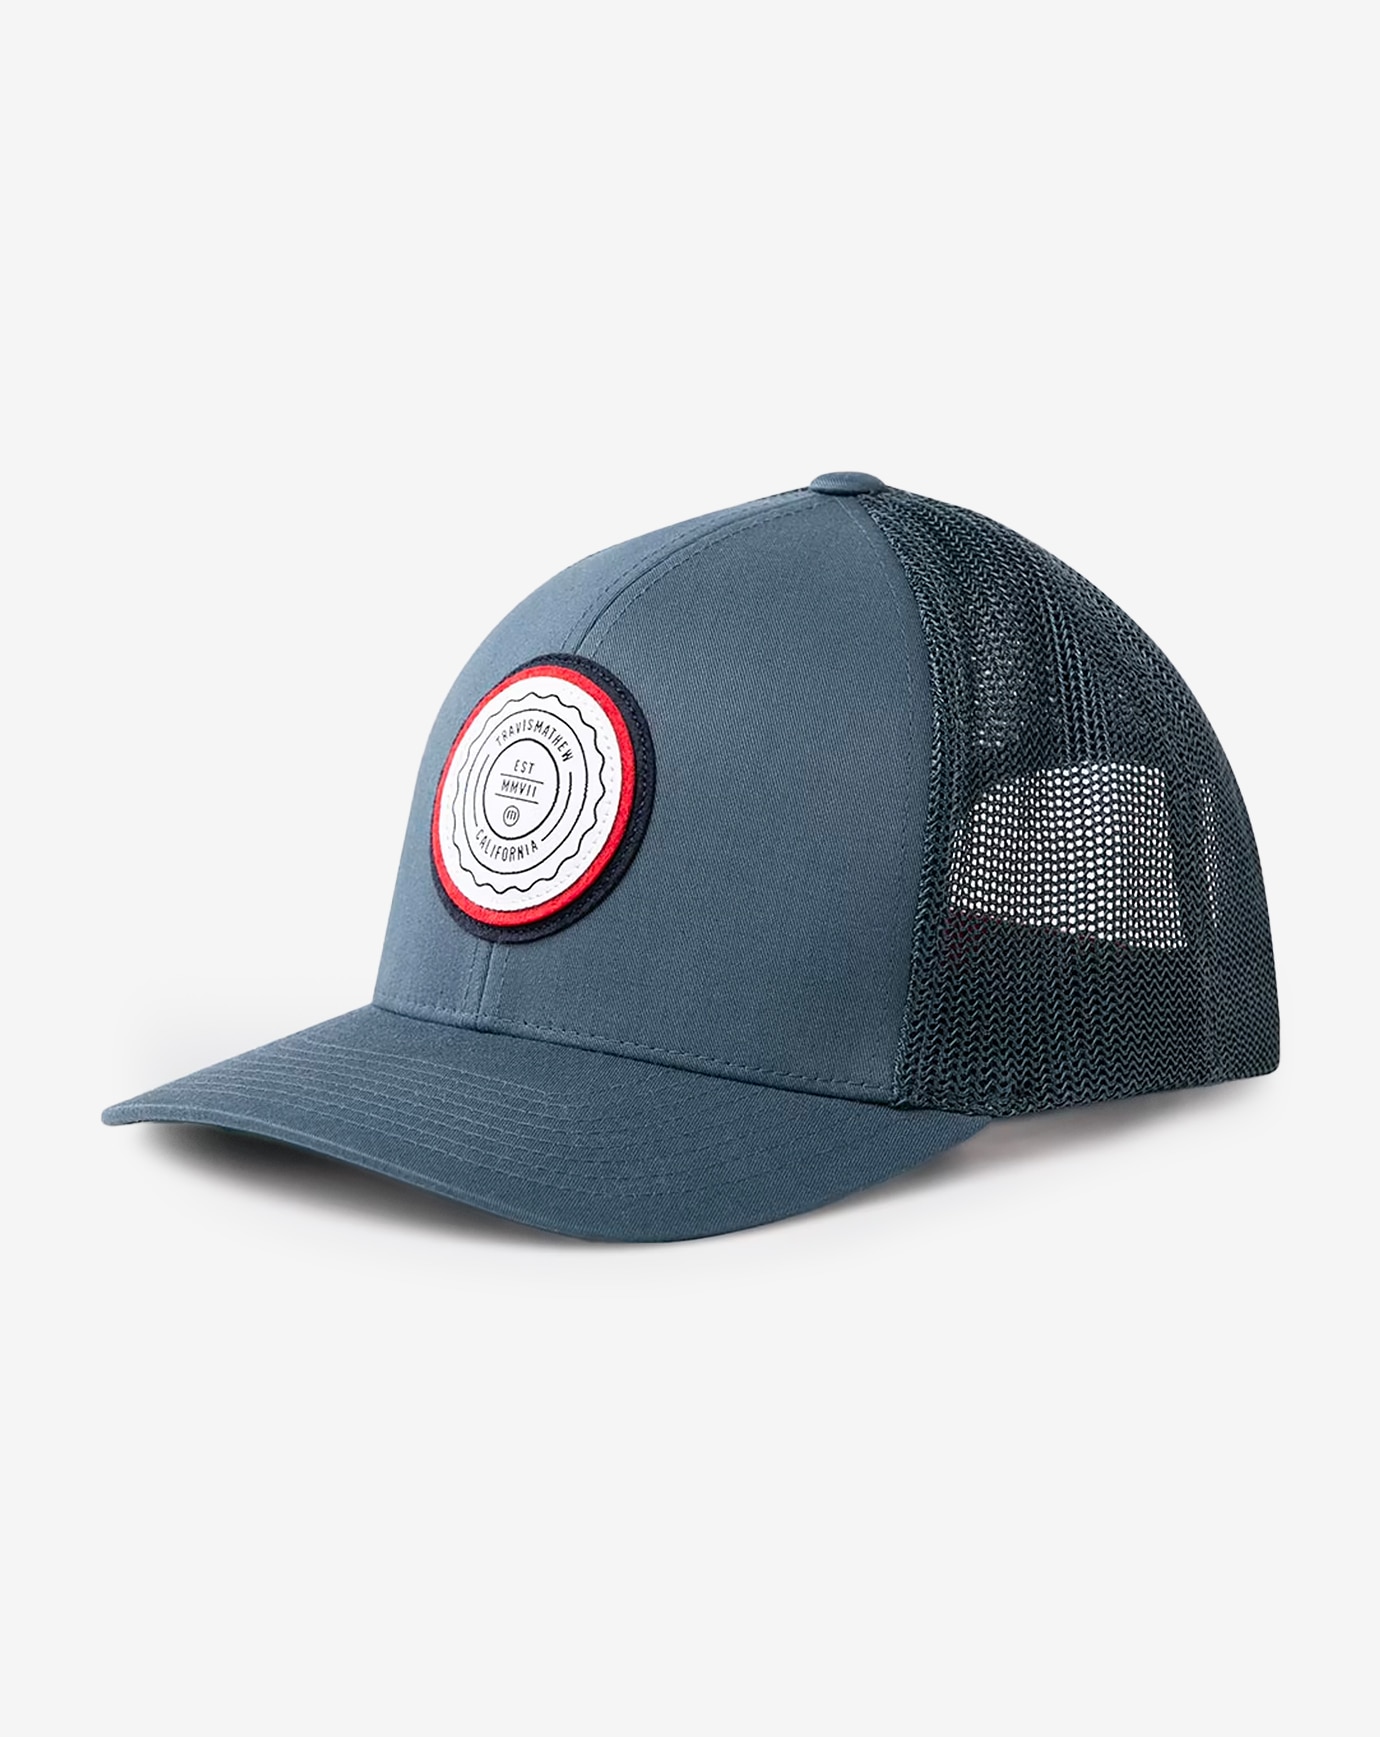 THE PATCH SNAPBACK HAT Image Thumbnail 2